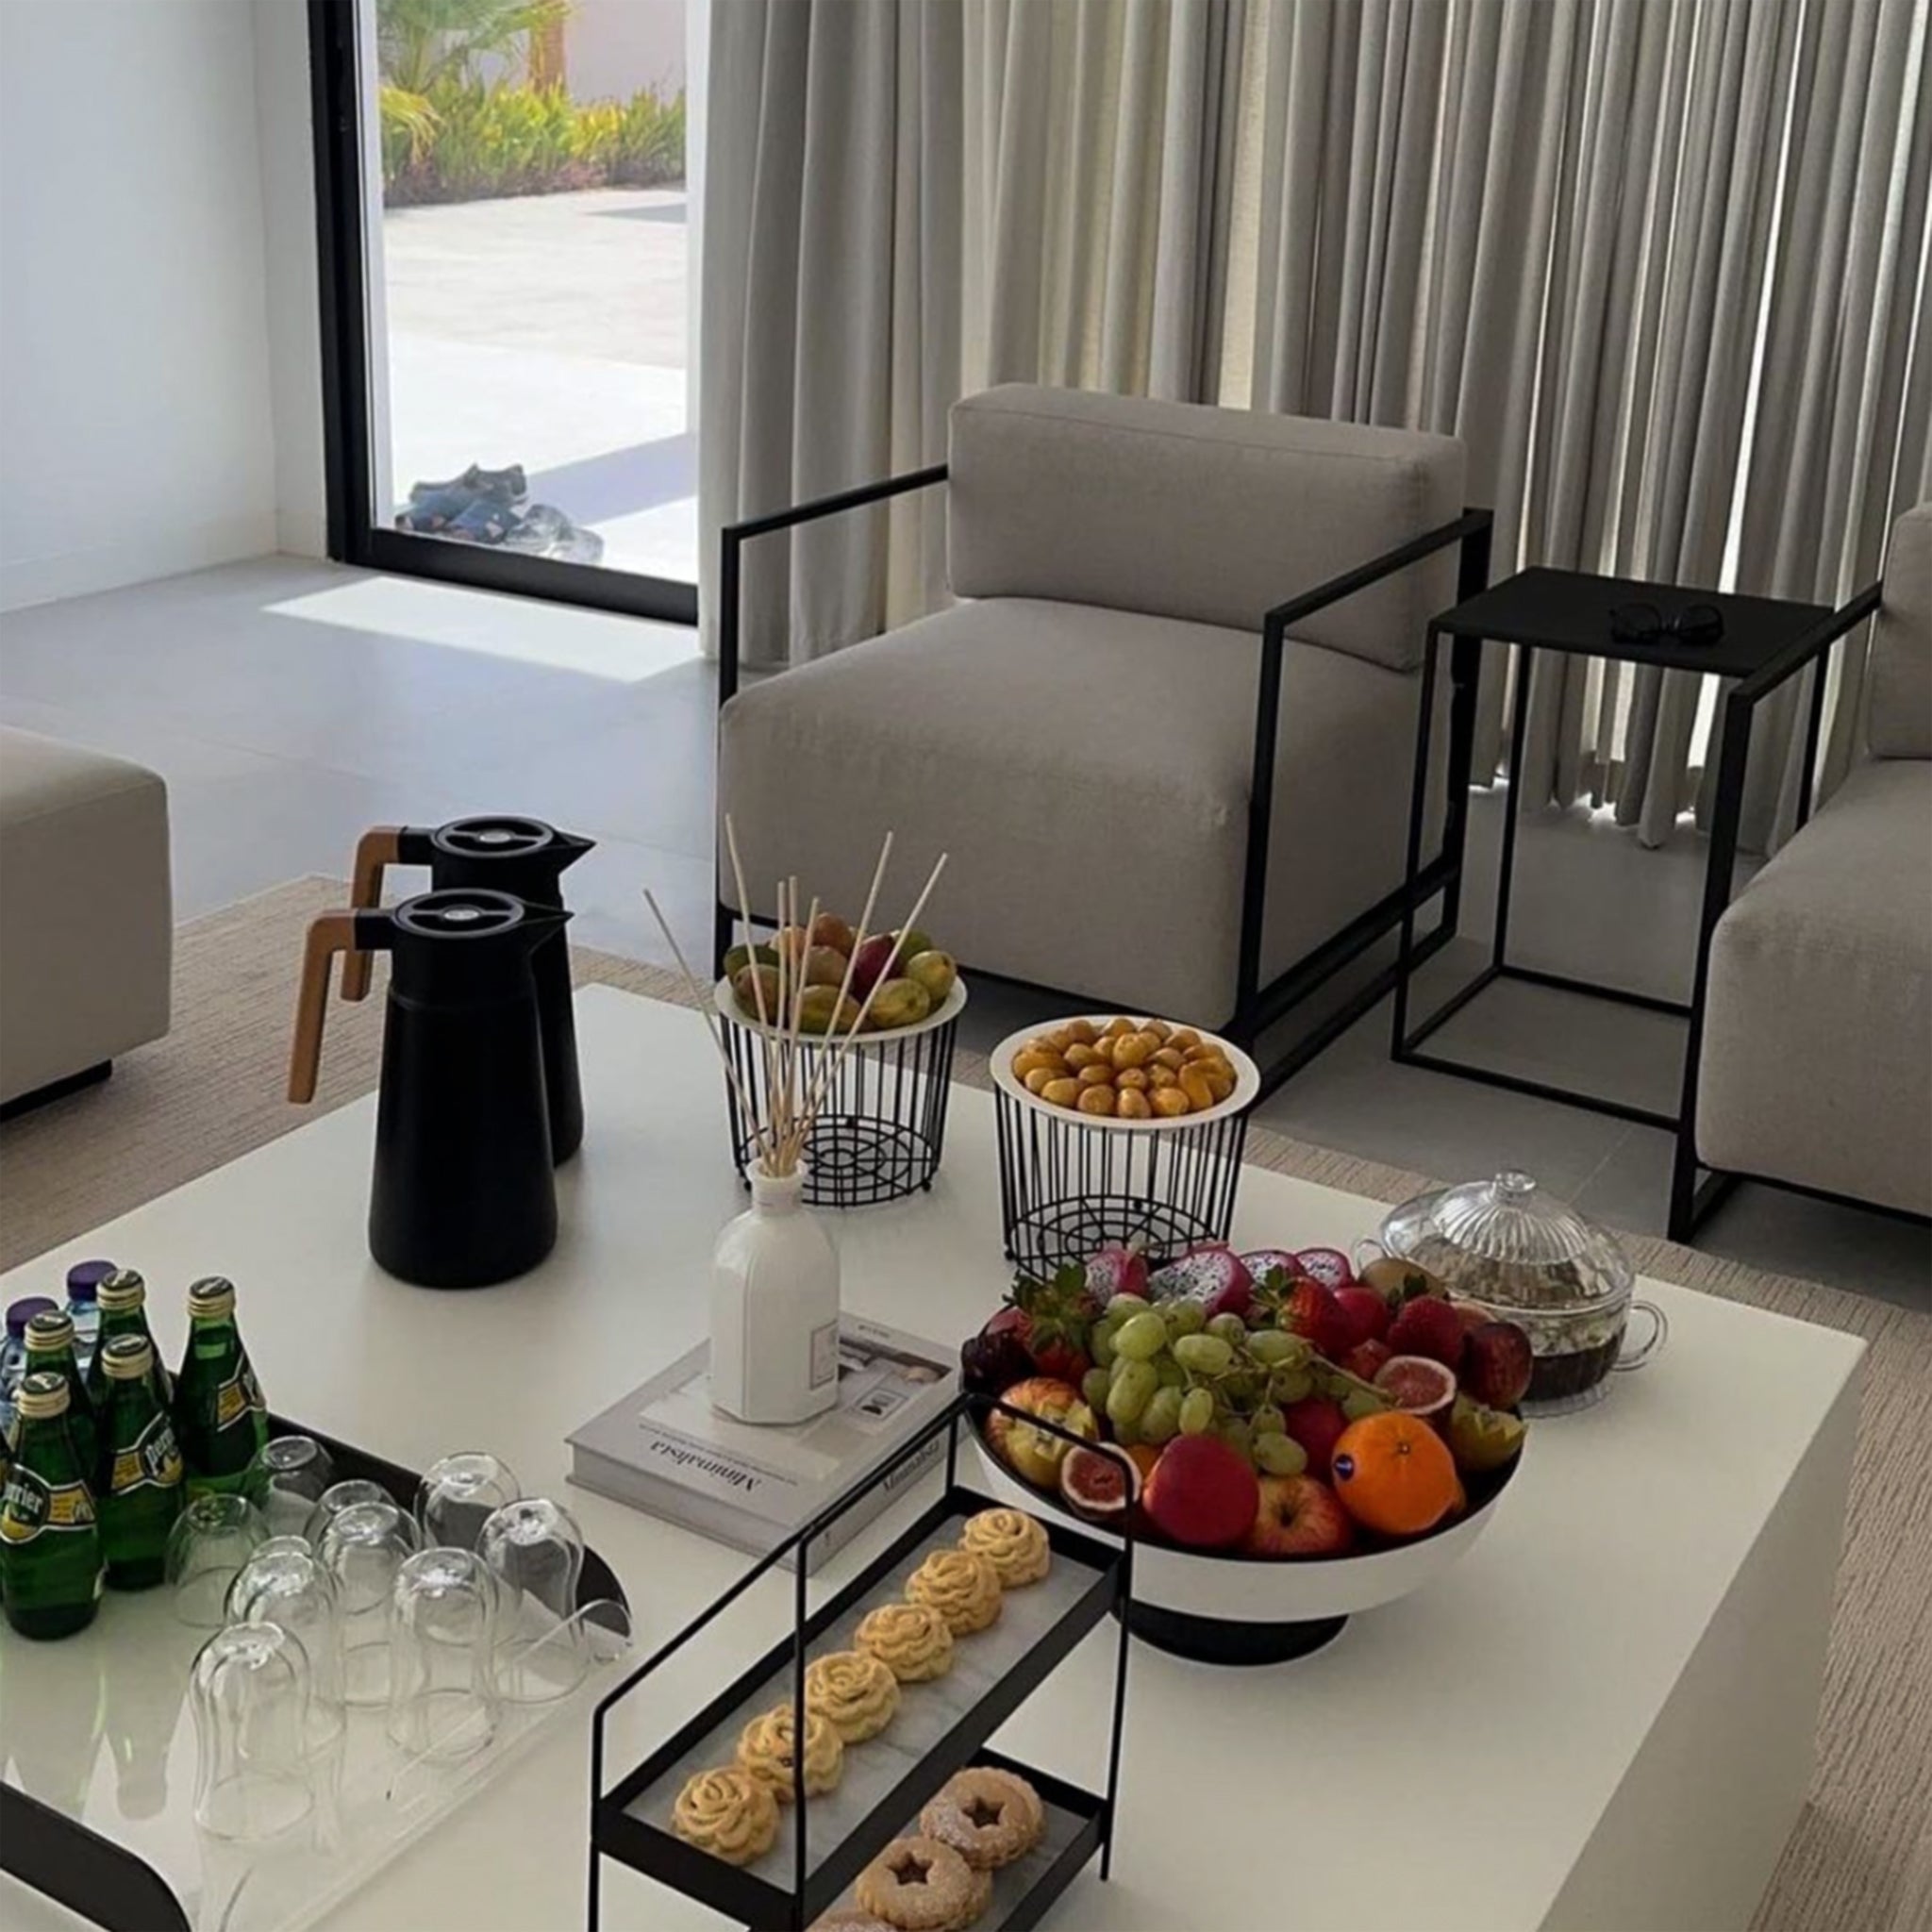 Modern living room setup featuring The Dexter Accent Chairs with light grey cushions and black metal frames, accompanied by a coffee table adorned with snacks, drinks, and decorative items.